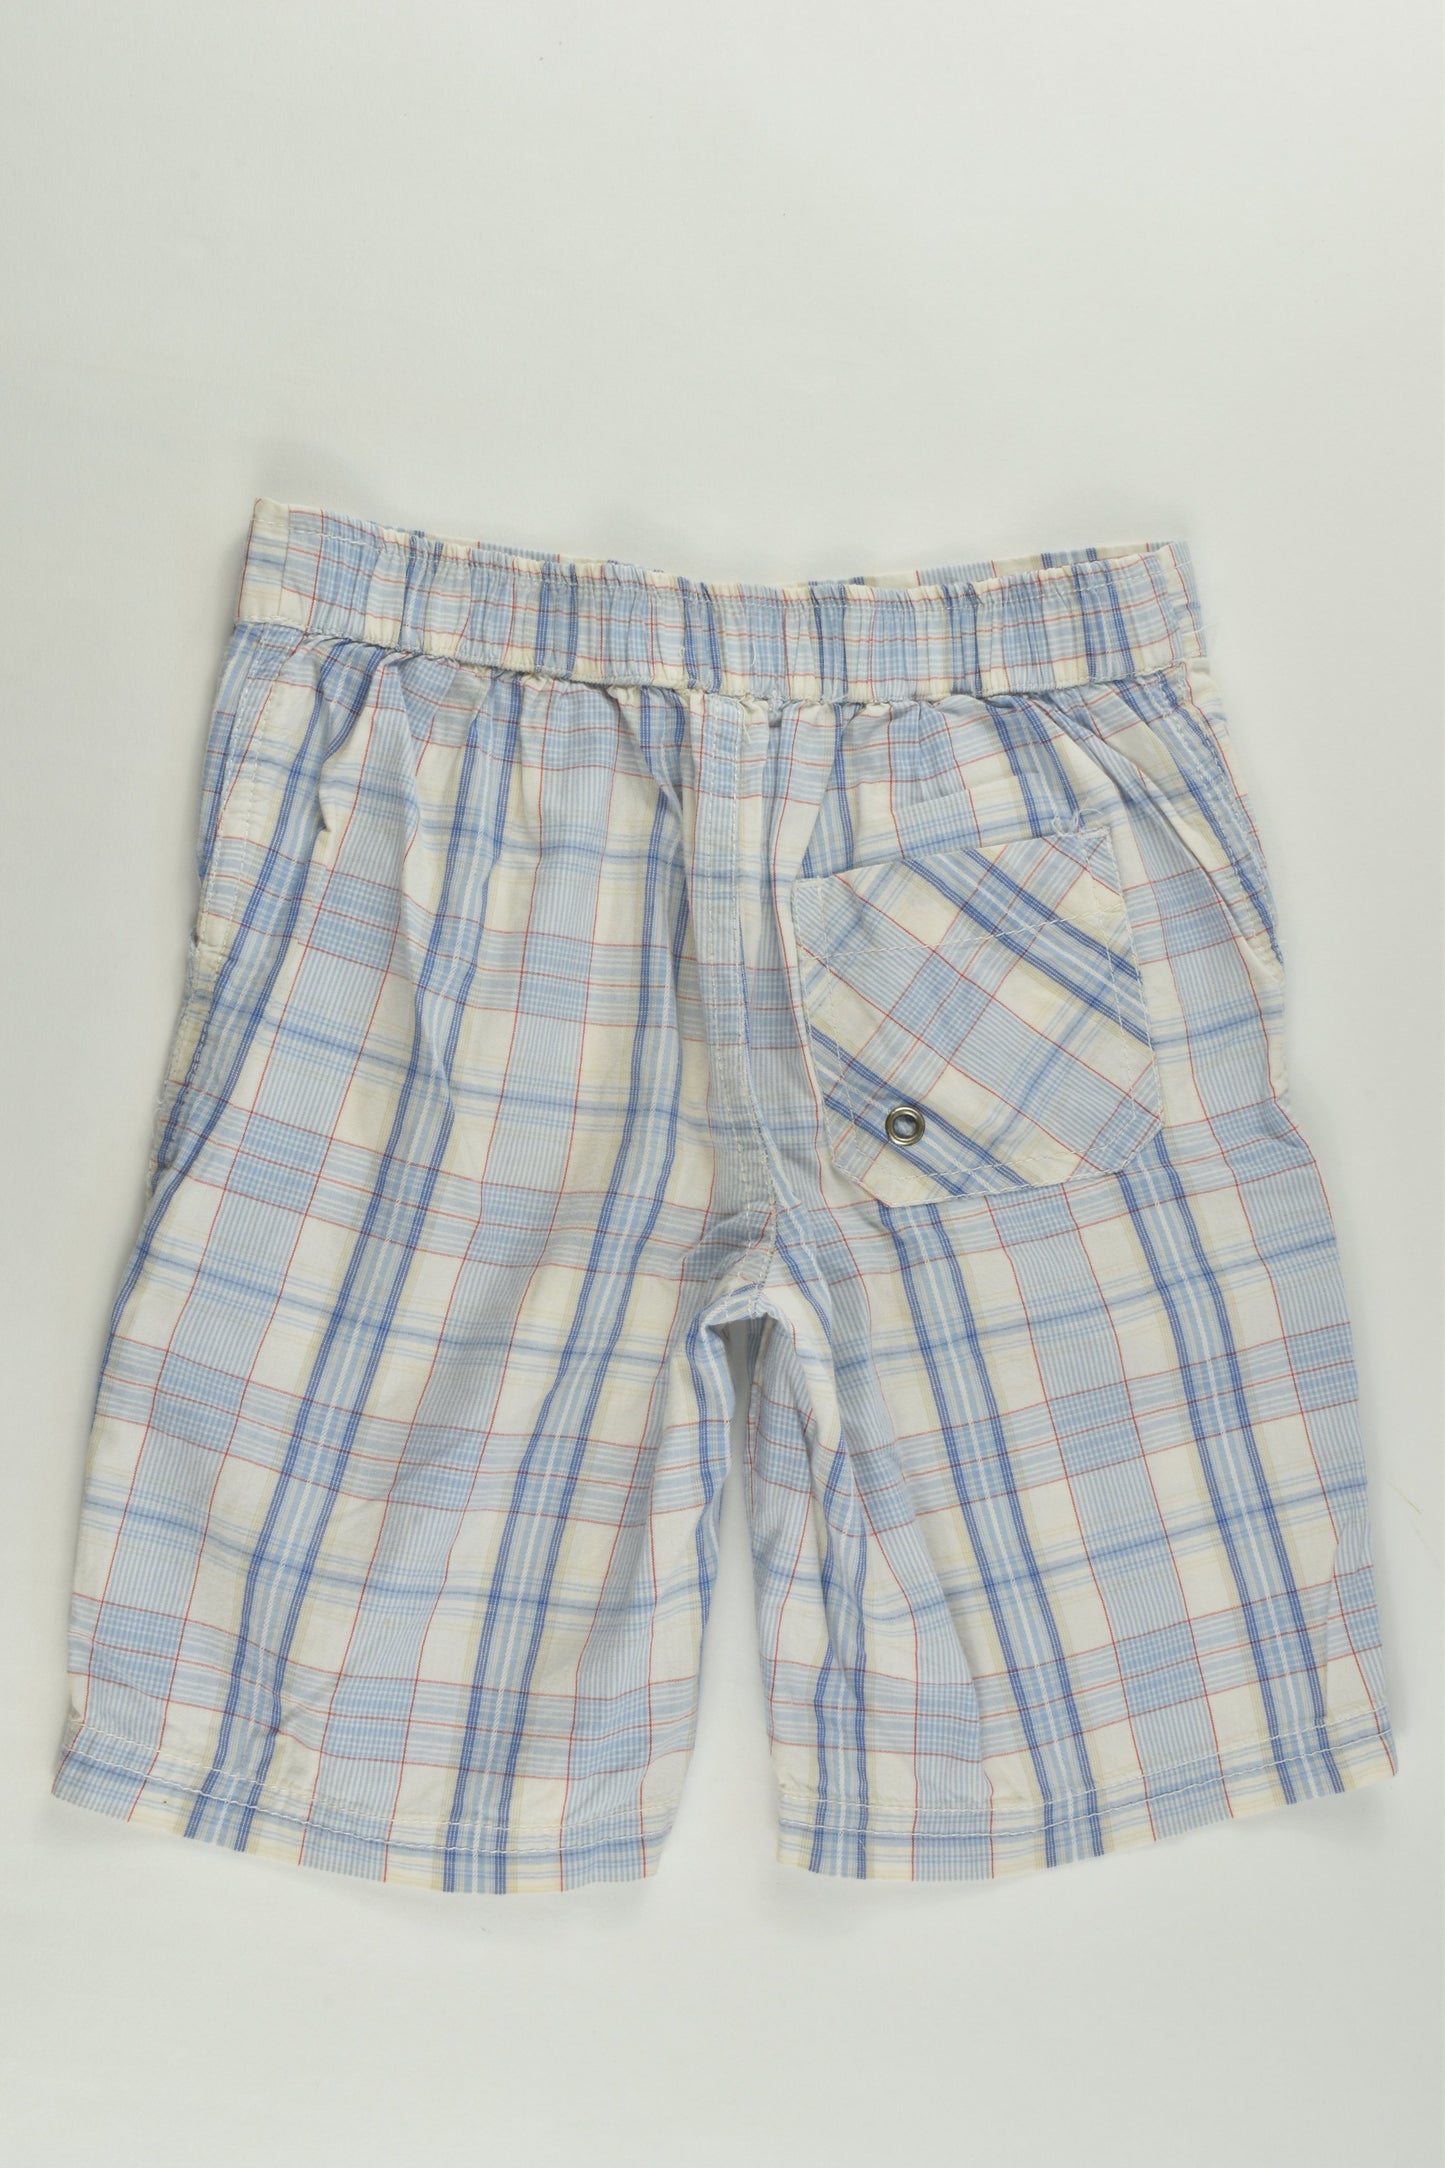 Purebaby Size 2 (18-24 months) Checked Shorts